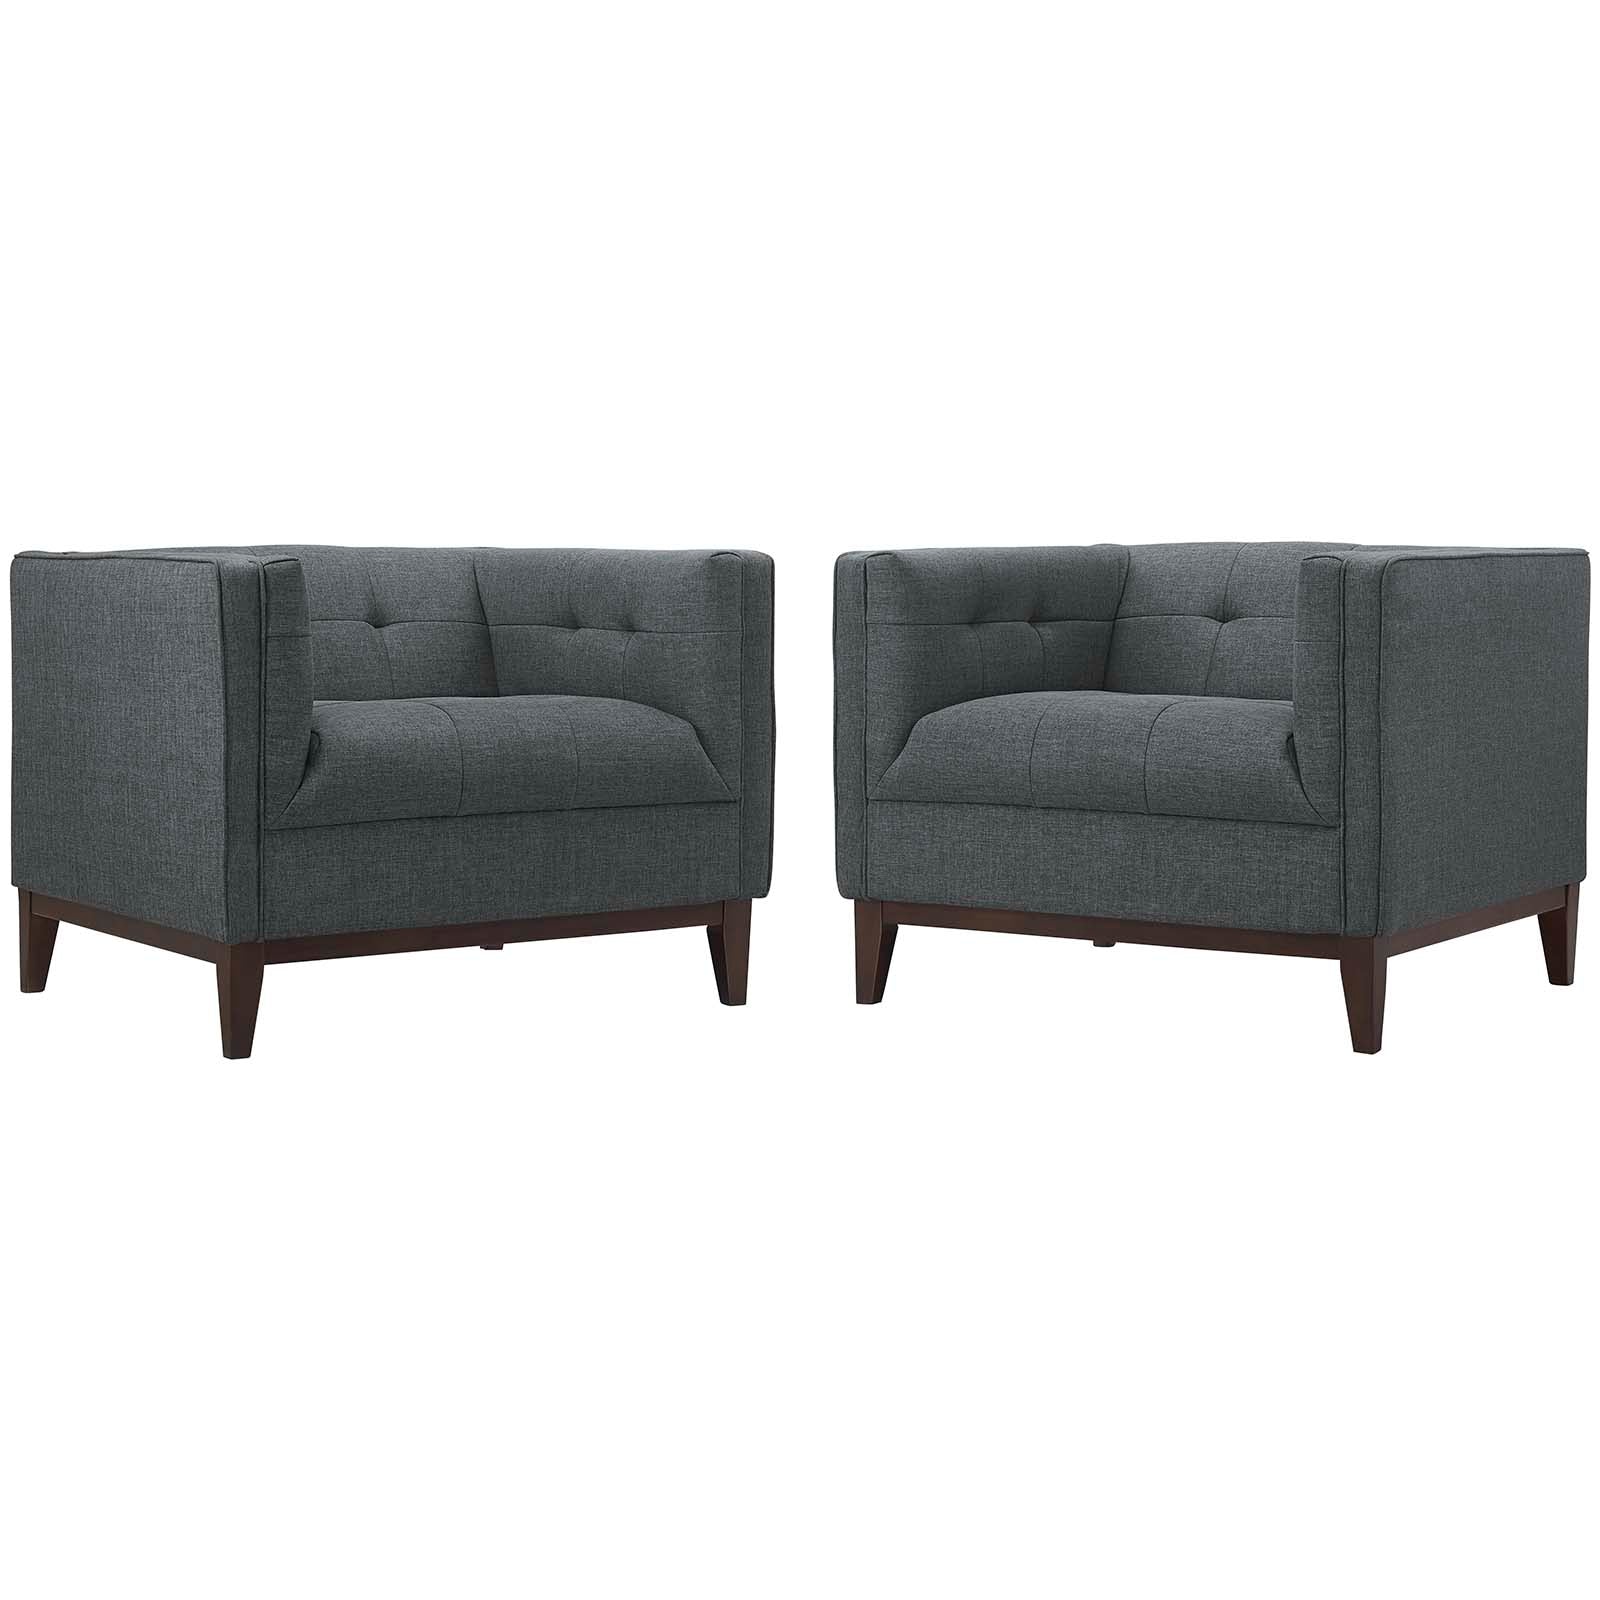 Modway Living Room Sets - Serve Armchairs Set Of 2 Gray